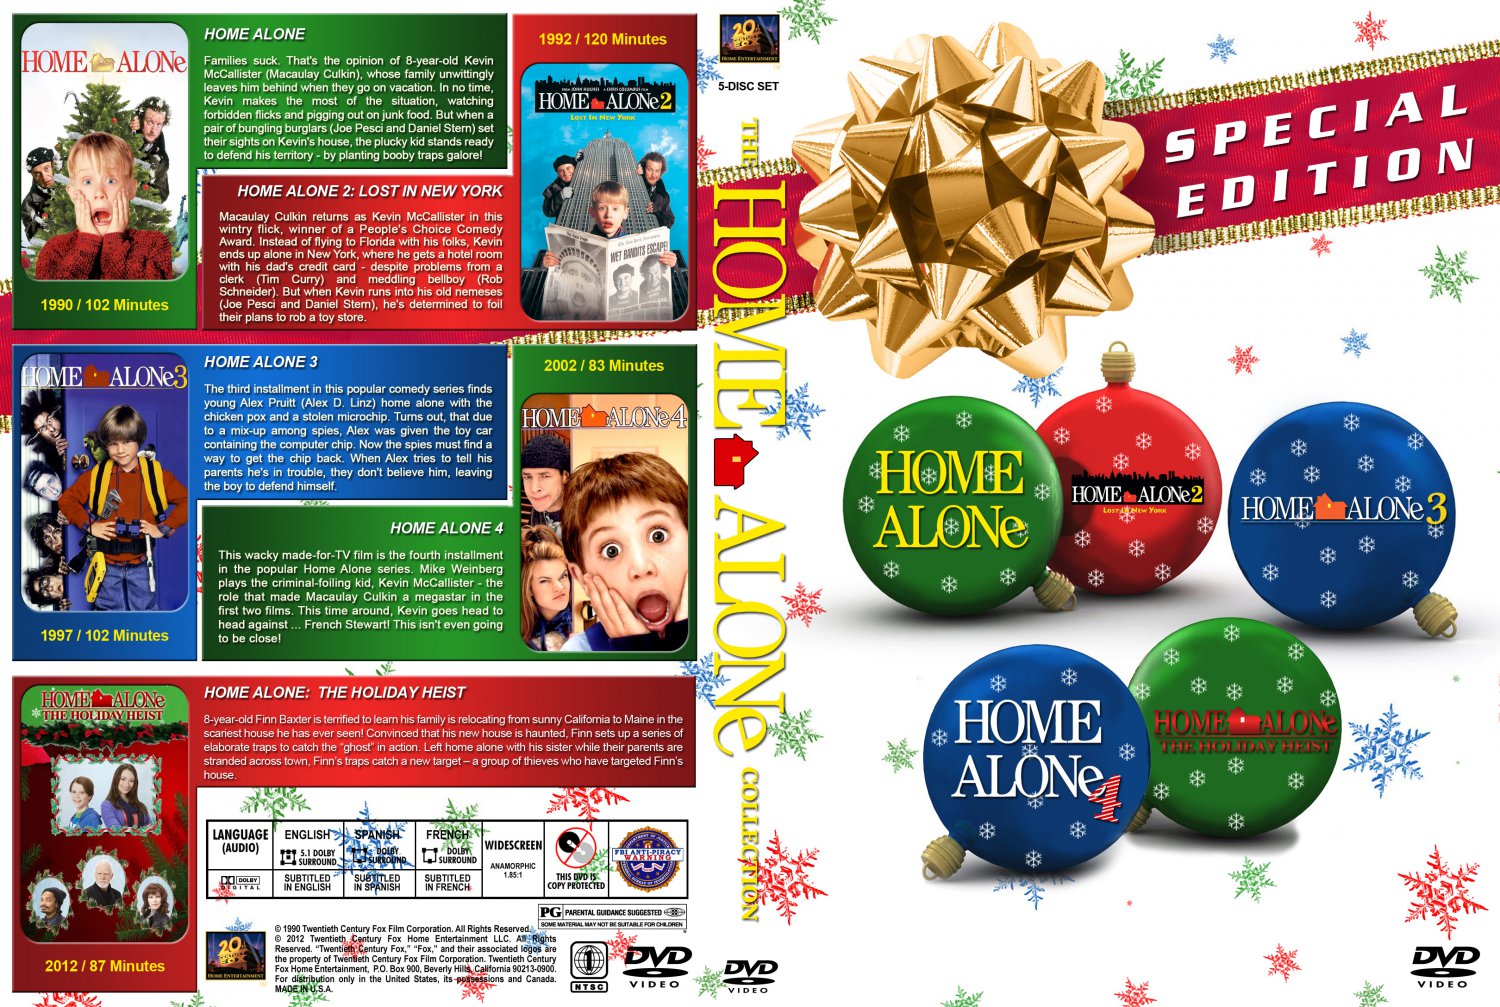 home dvd cover